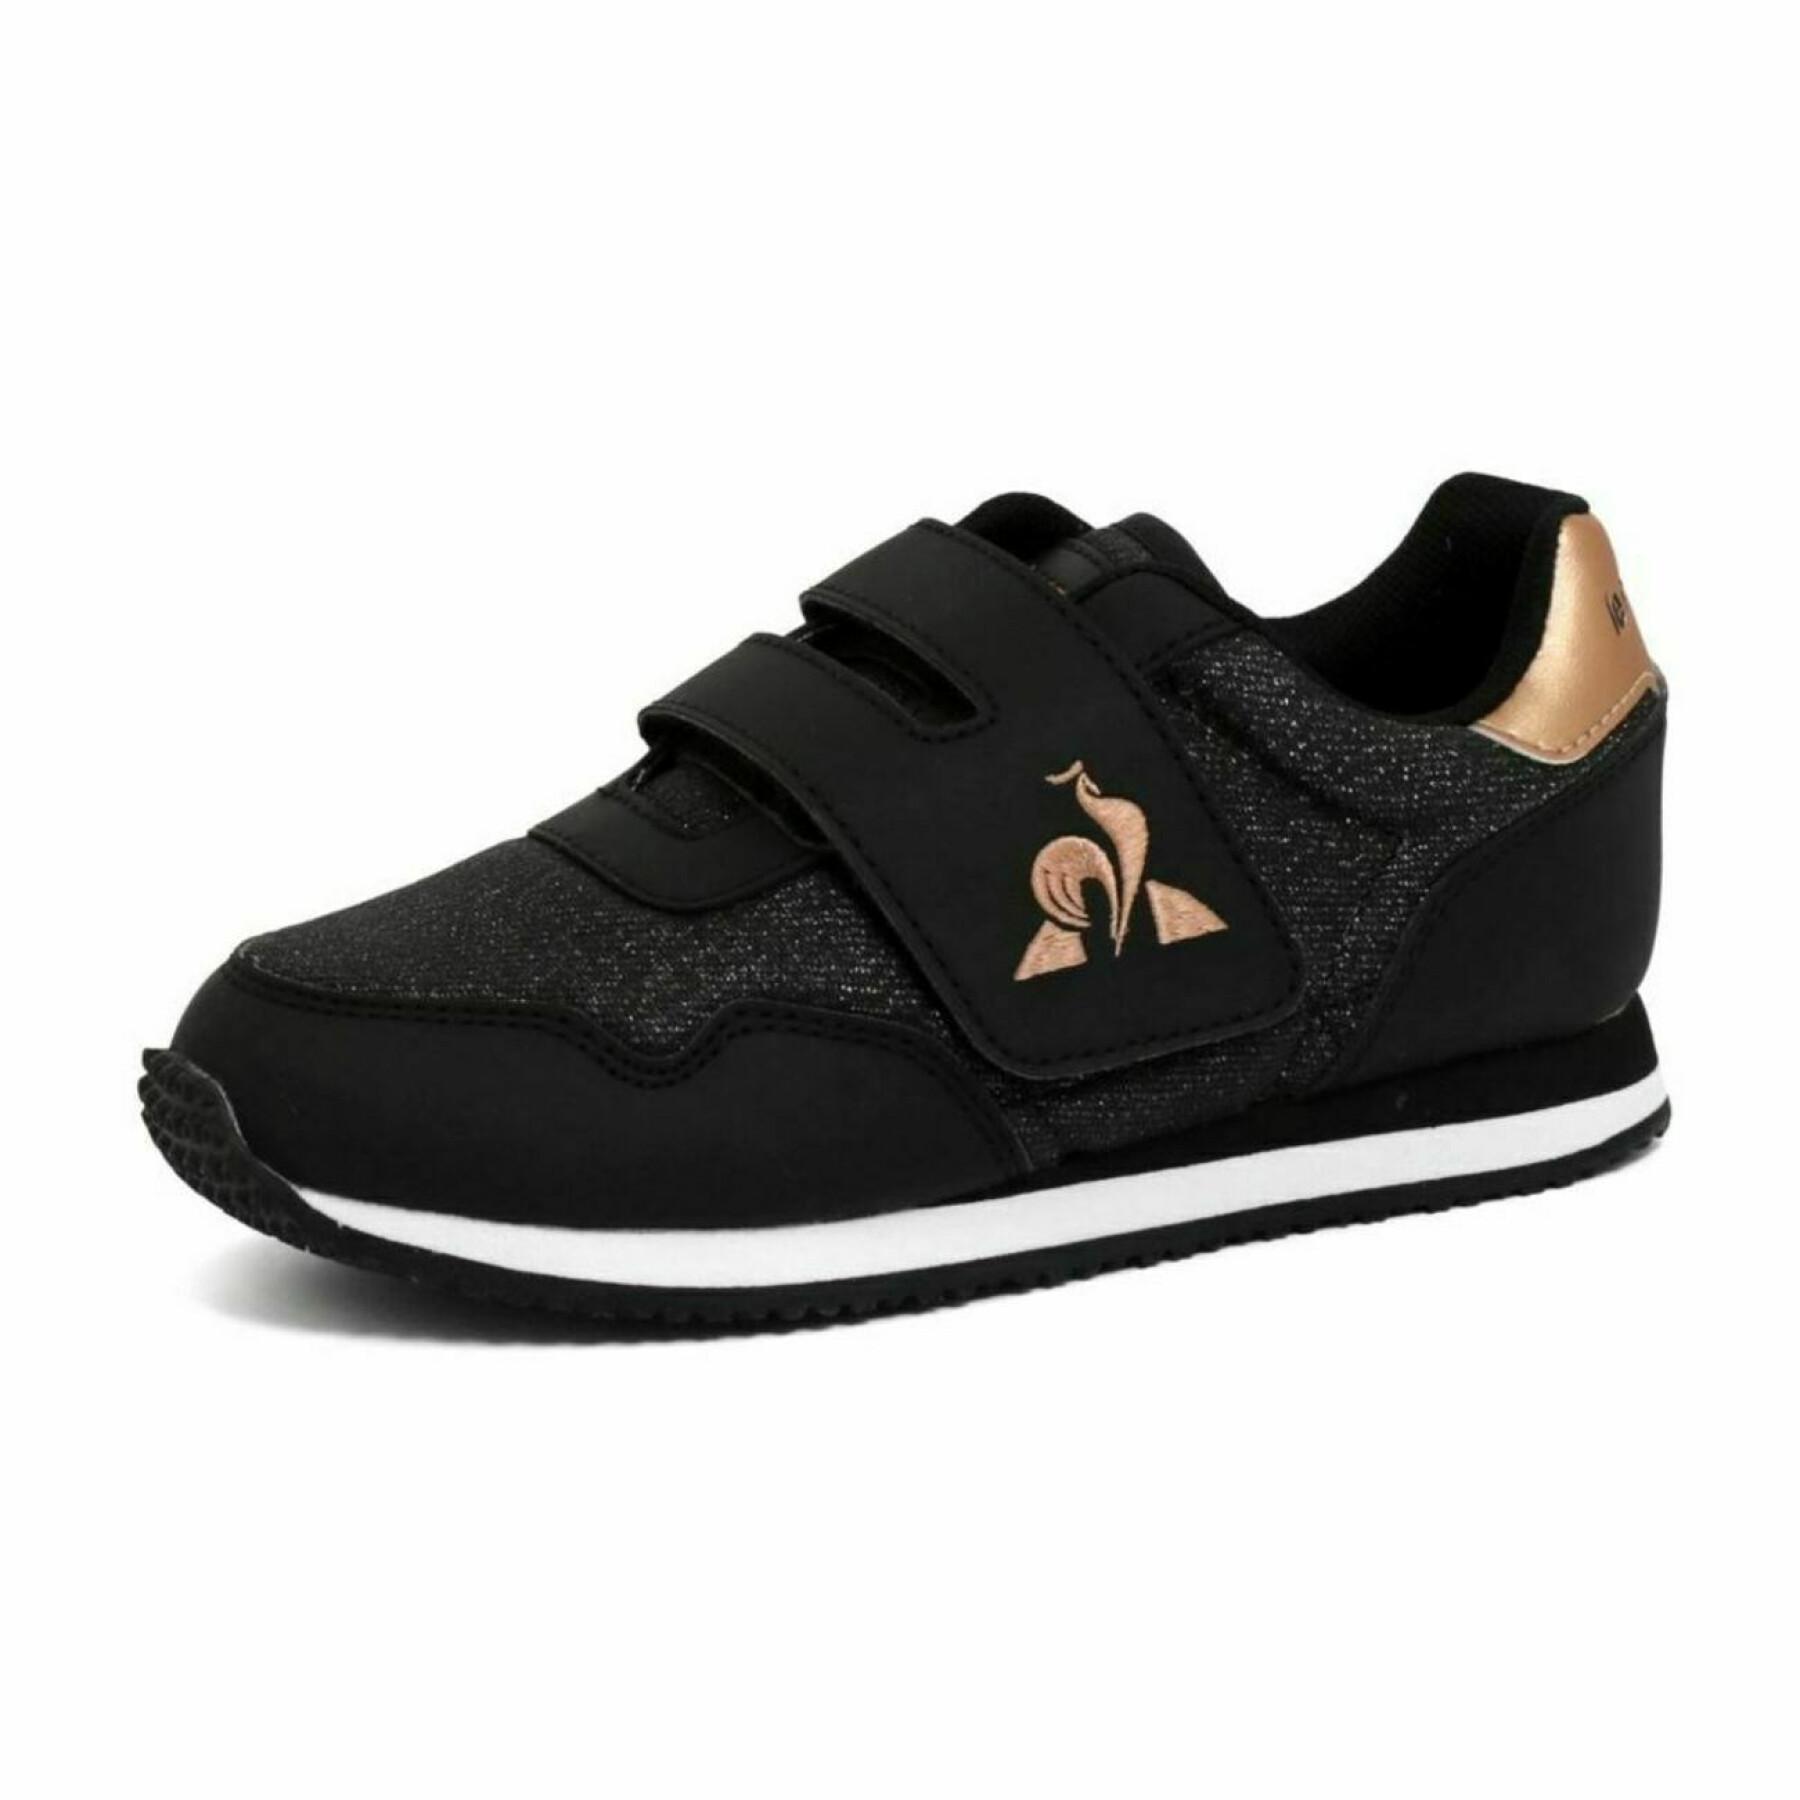 Girl's shoes Le Coq Sportif Astra ps